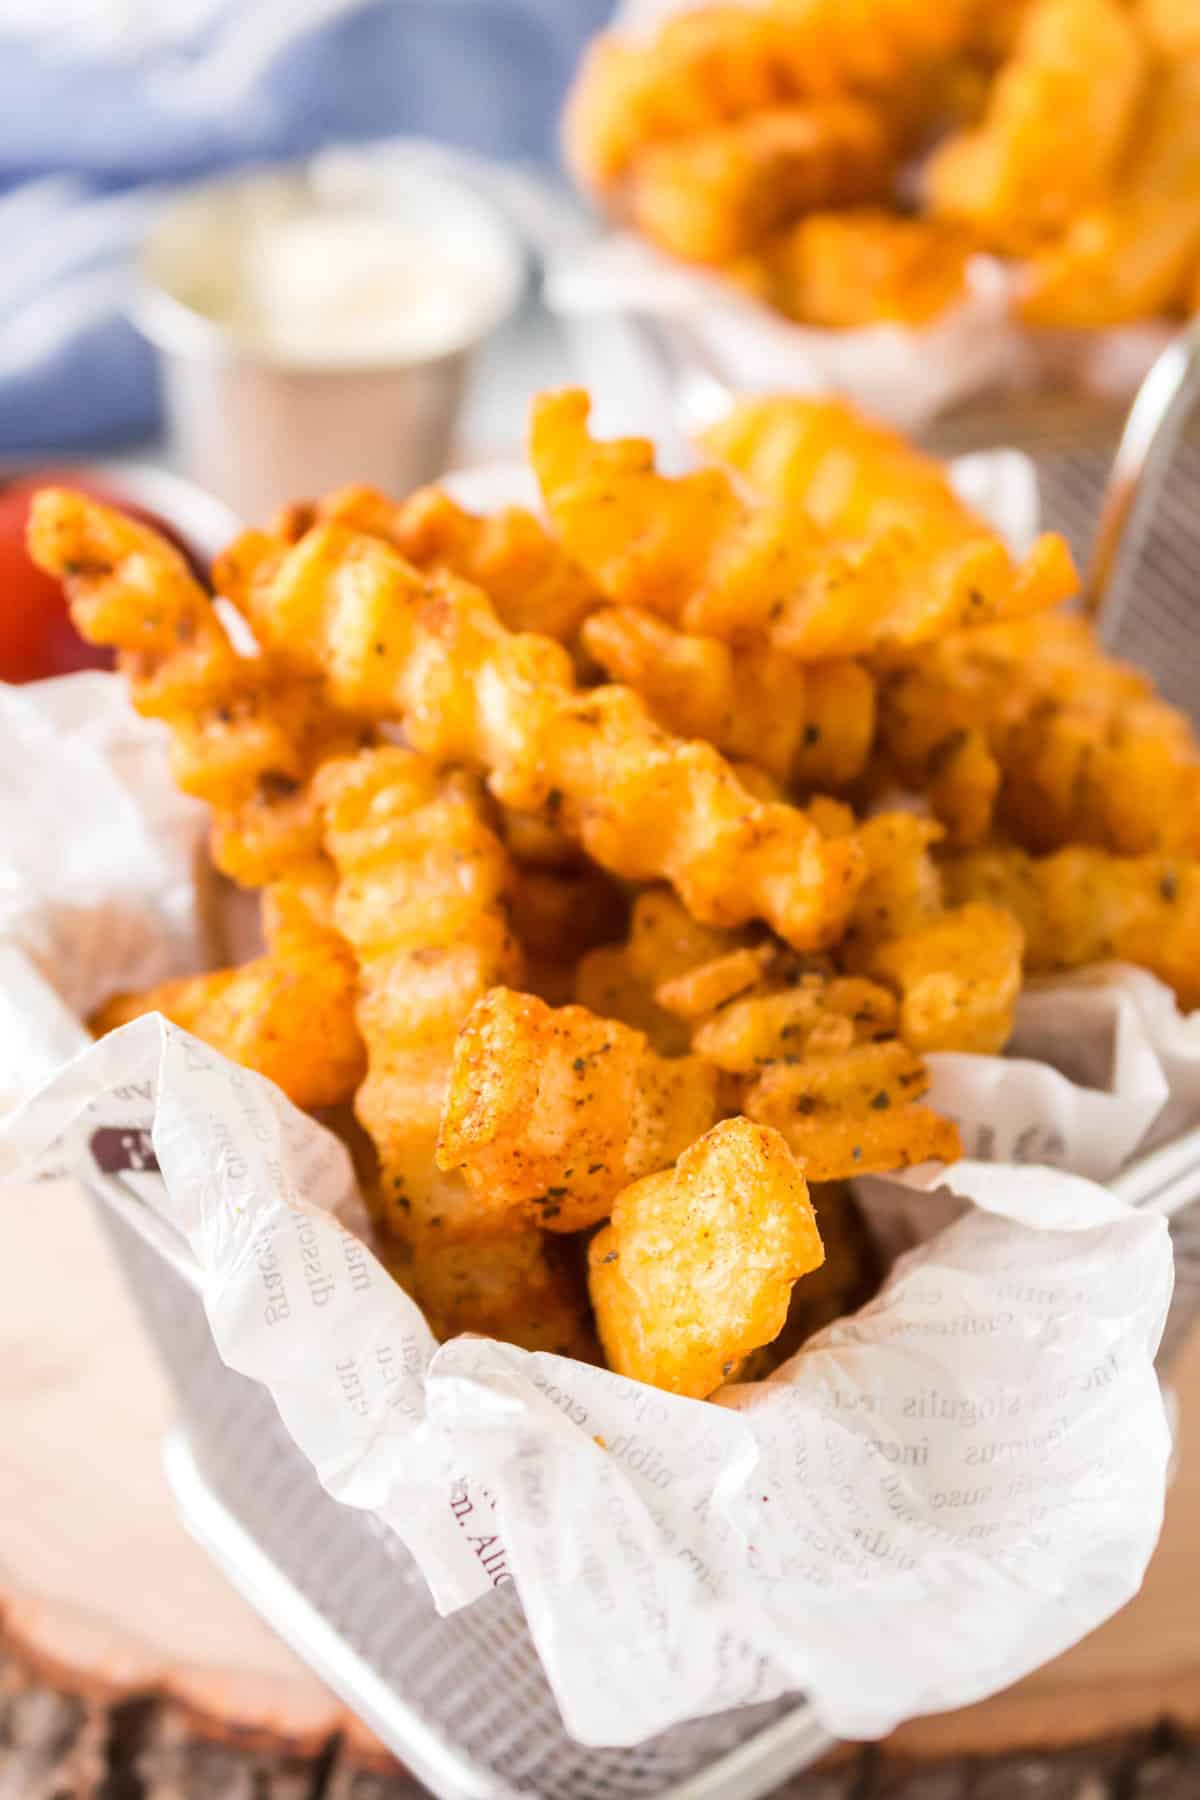 https://forktospoon.com/wp-content/uploads/2022/10/Air-Fryer-Cajun-Spice-French-Fries-9-scaled.jpg